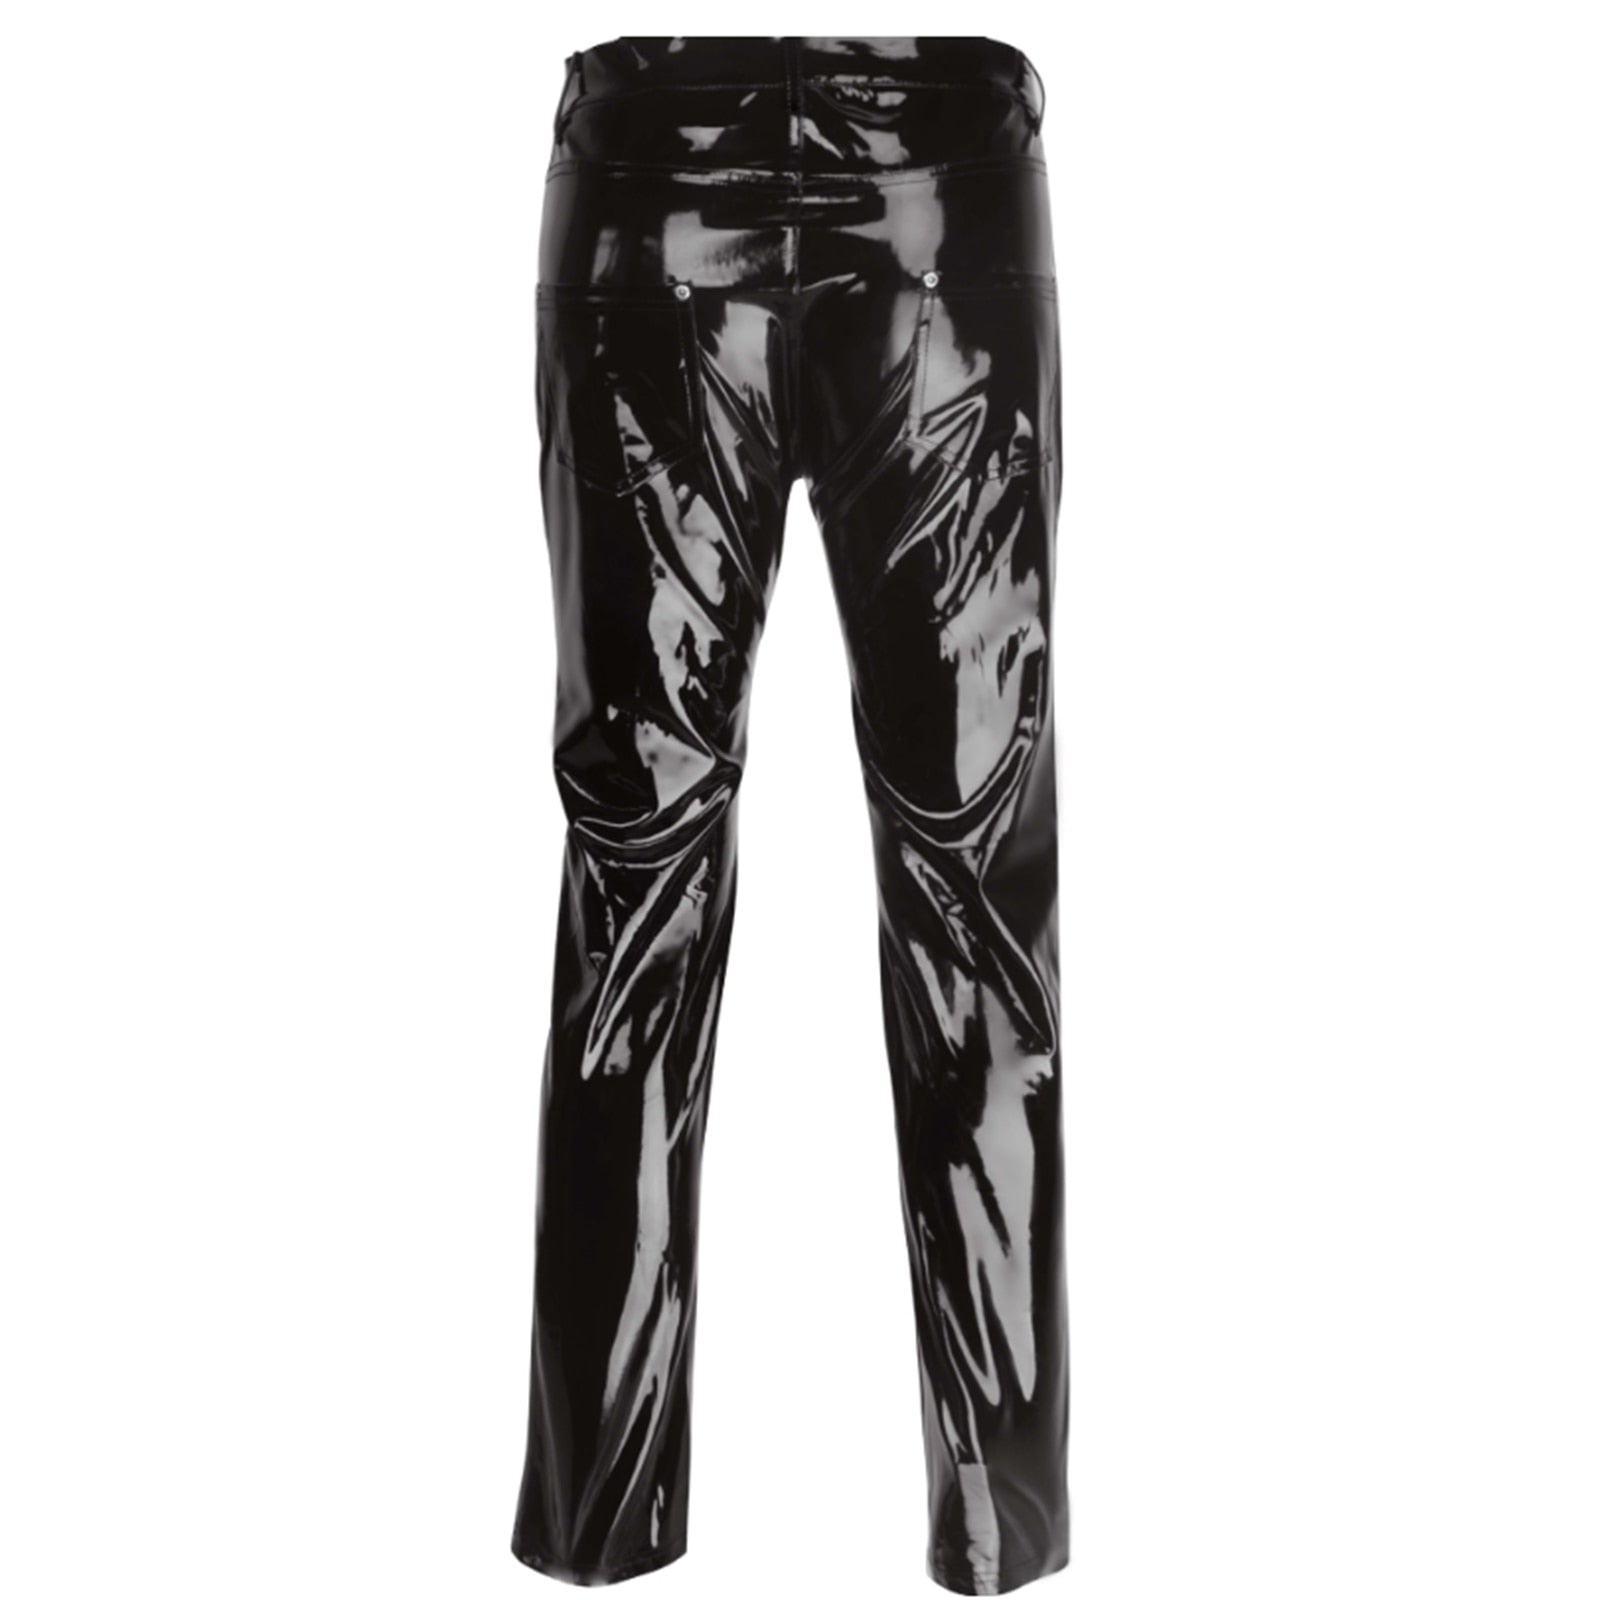 Trendy Gothic Faux Leather PVC Pants for Alternative Fashion Enthusiasts